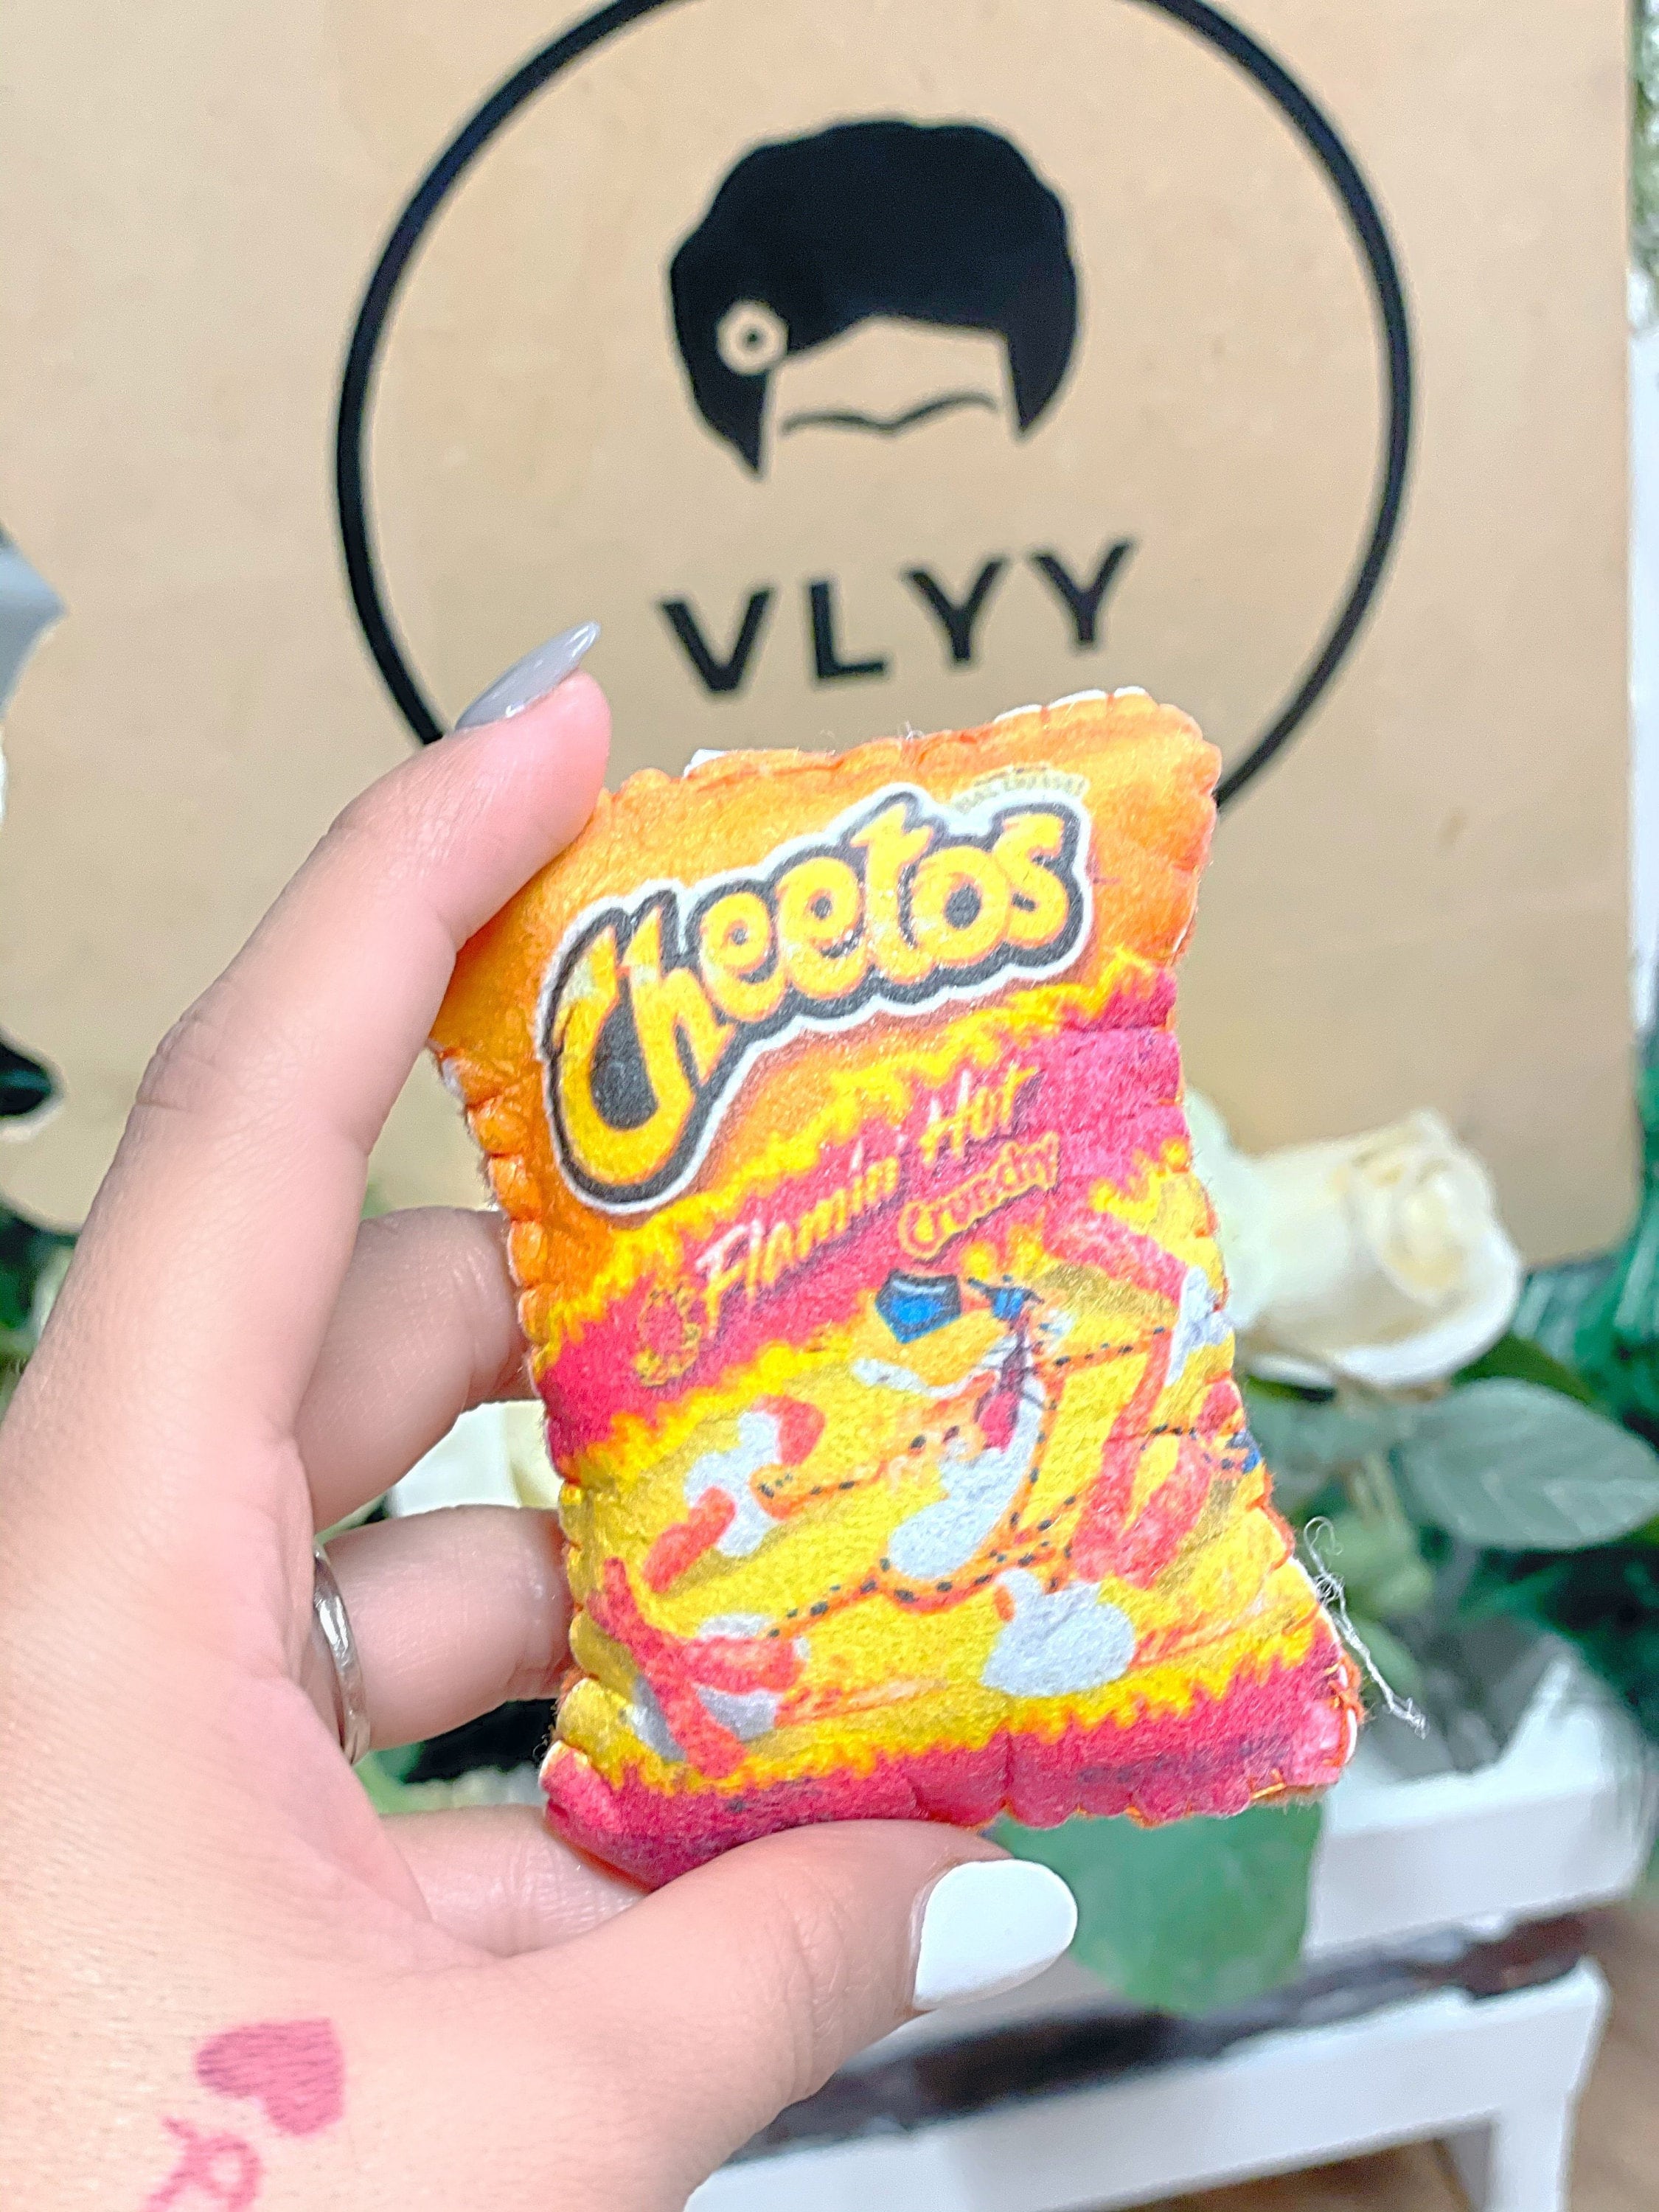 TRYING Cheetos from Brazil ! September 2019 